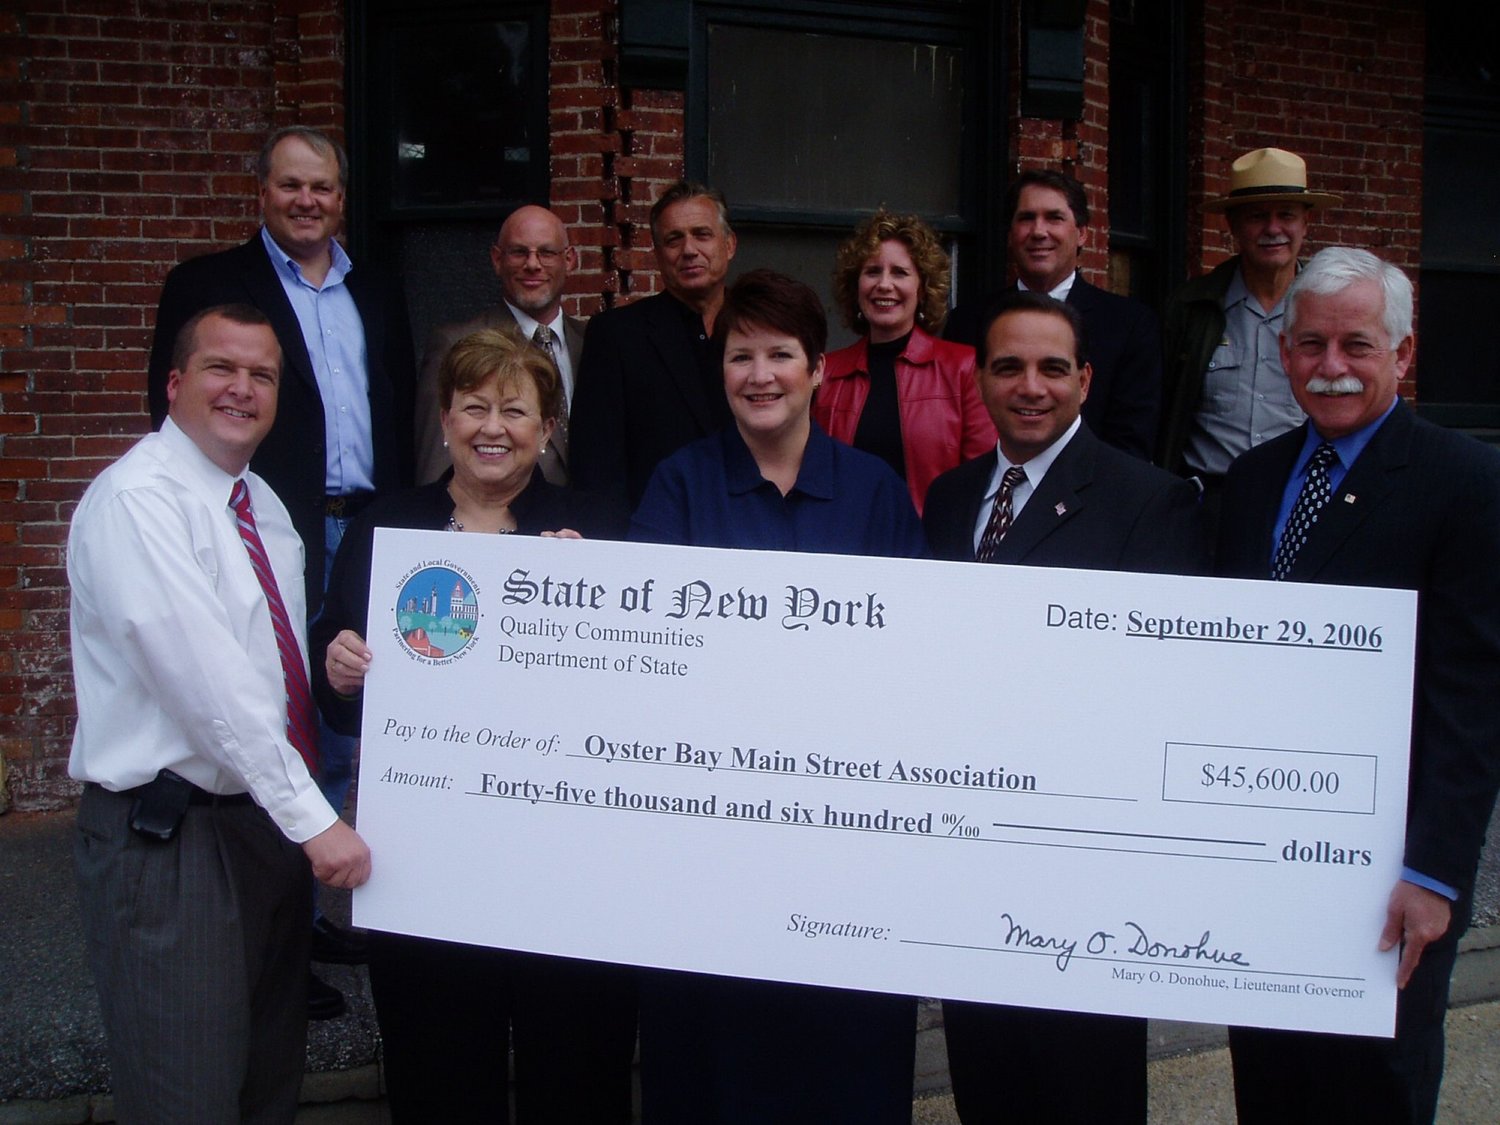 The Main Street Association was awarded a grant of $45,600 in 2006 for its plan to create a plaza entrance at the foot of Audrey Avenue, although the town ultimately chose not to implement it.